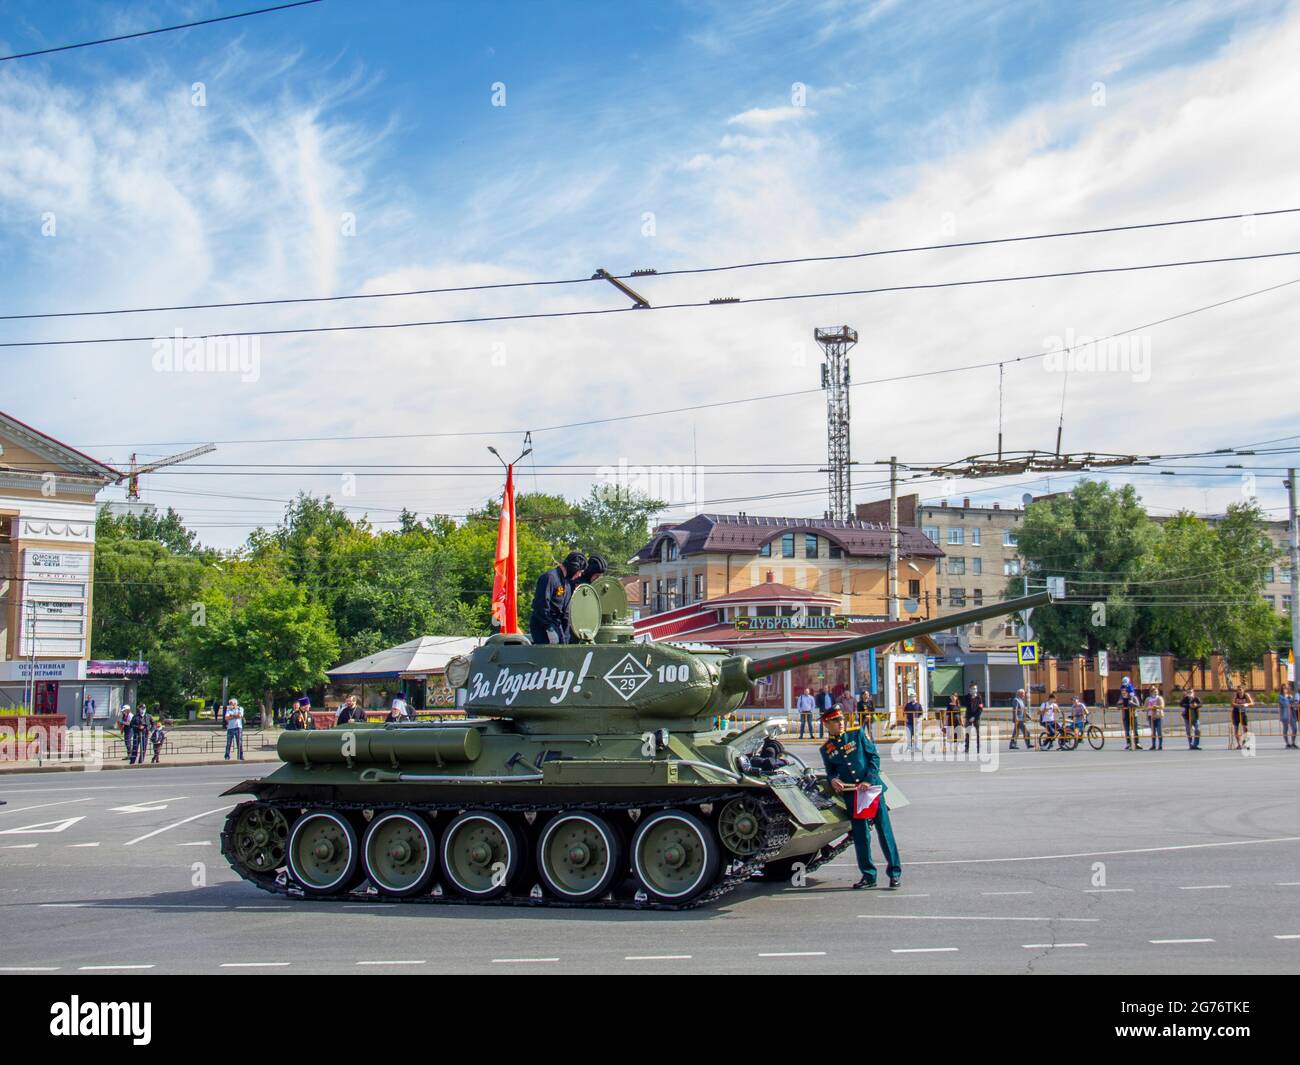 Omsk, Russia. 24 June, 2020. The crew of the T-34 tank of the Great Patriotic War expects the beginning of the parade. Parade of military equipment in Stock Photo